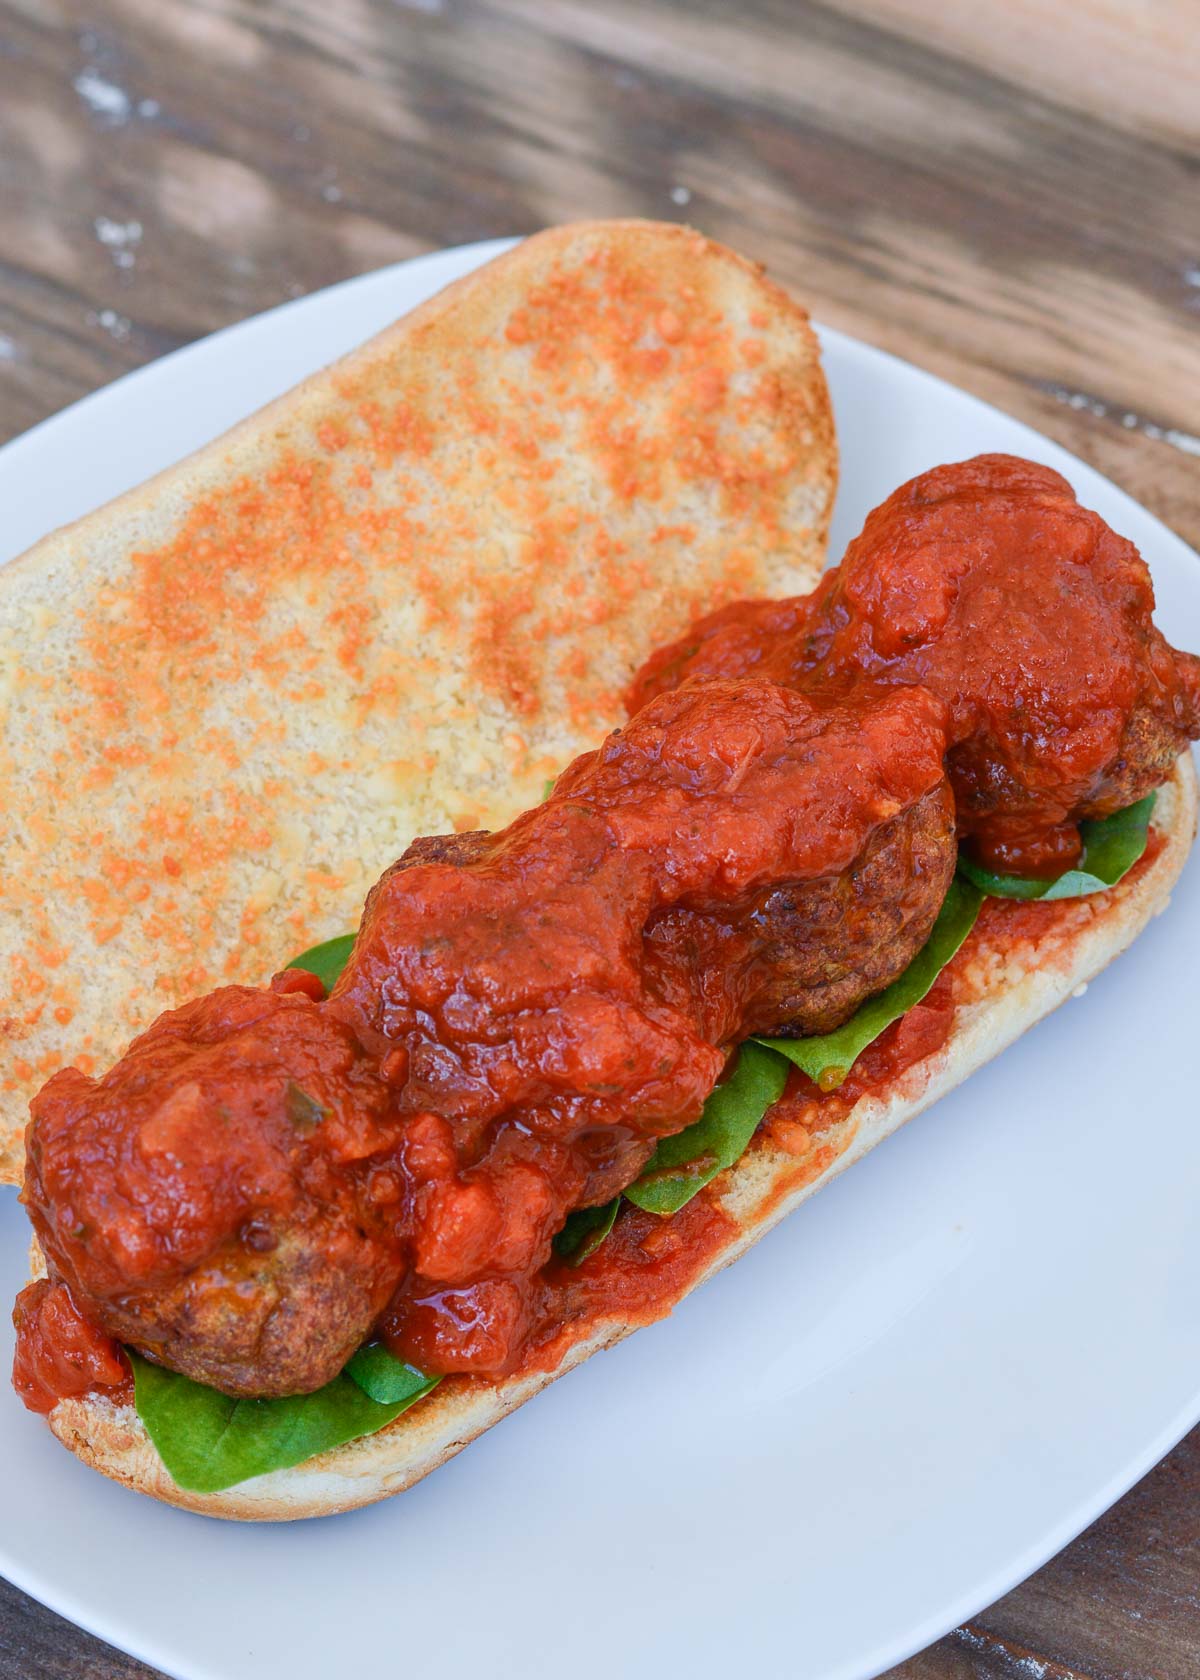 meatball sub on a plate without cheese